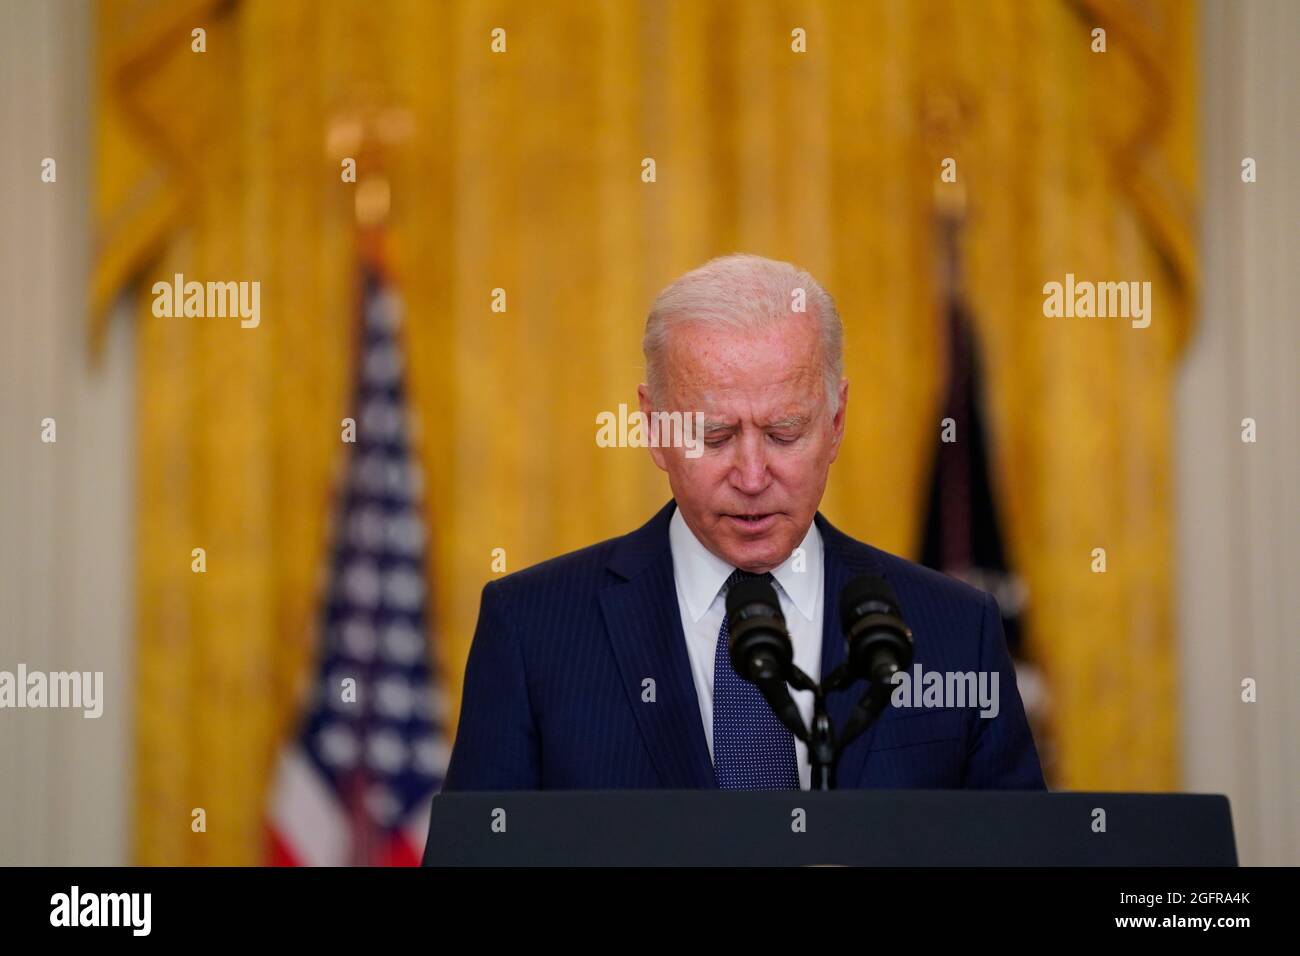 United States President Joe Biden delivers remarks on the terror attack at Hamid Karzai International Airport in Kabul Afghanistan, and the US service members and Afghan victims killed and wounded in the East Room of the White House in Washington, DC on Thursday, August 26, 2021. Credit: Stefani Reynolds/Pool via CNP Stock Photo